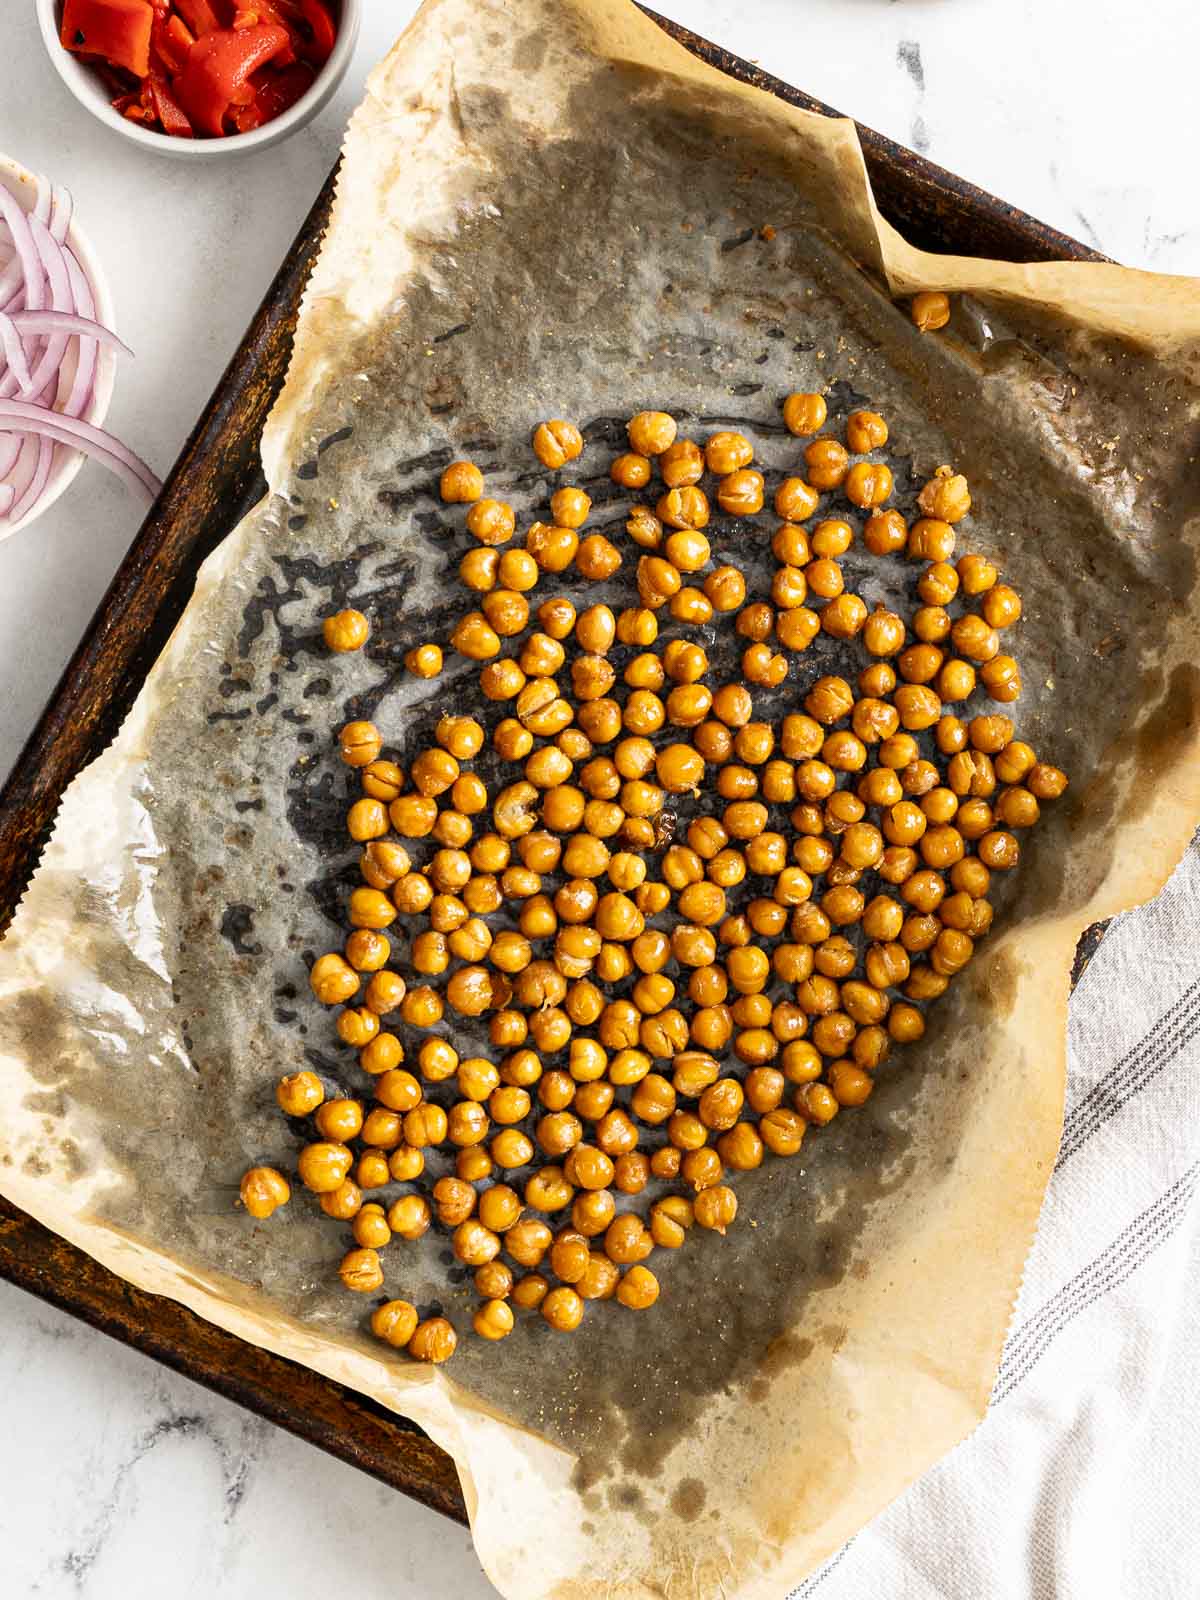 Roasted chickpeas in a sheet pan.